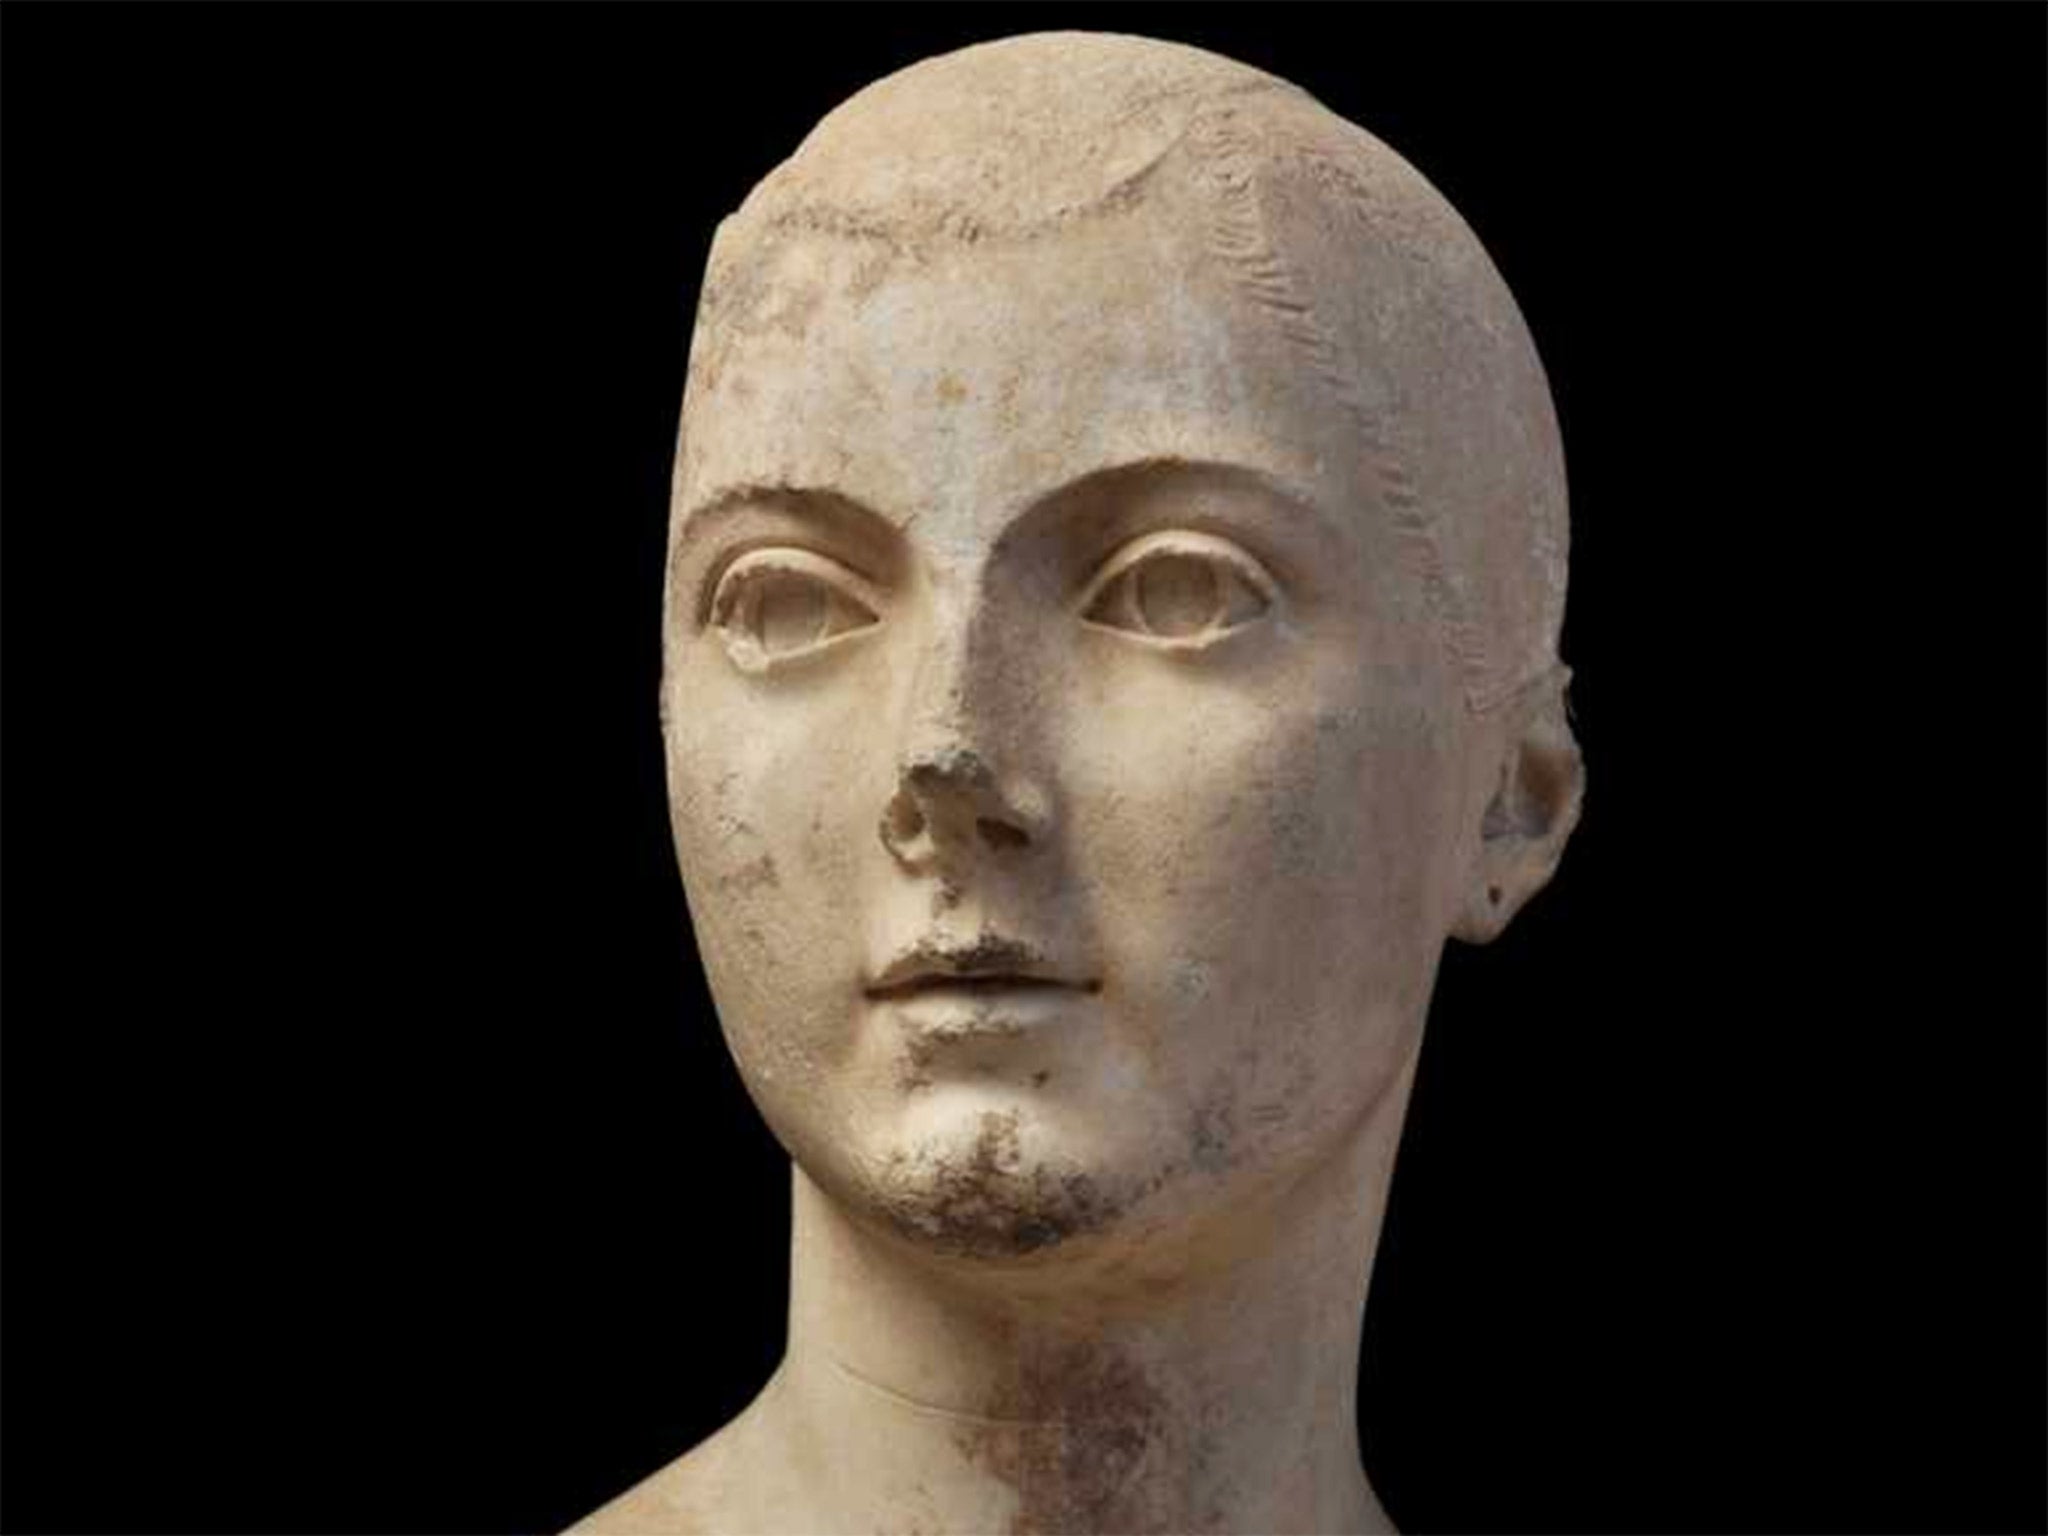 The collection, including the Maiden of Torlonia, has been kept in the basement of a stately home while Italy’s government failed to persuade the owners to let the world see it